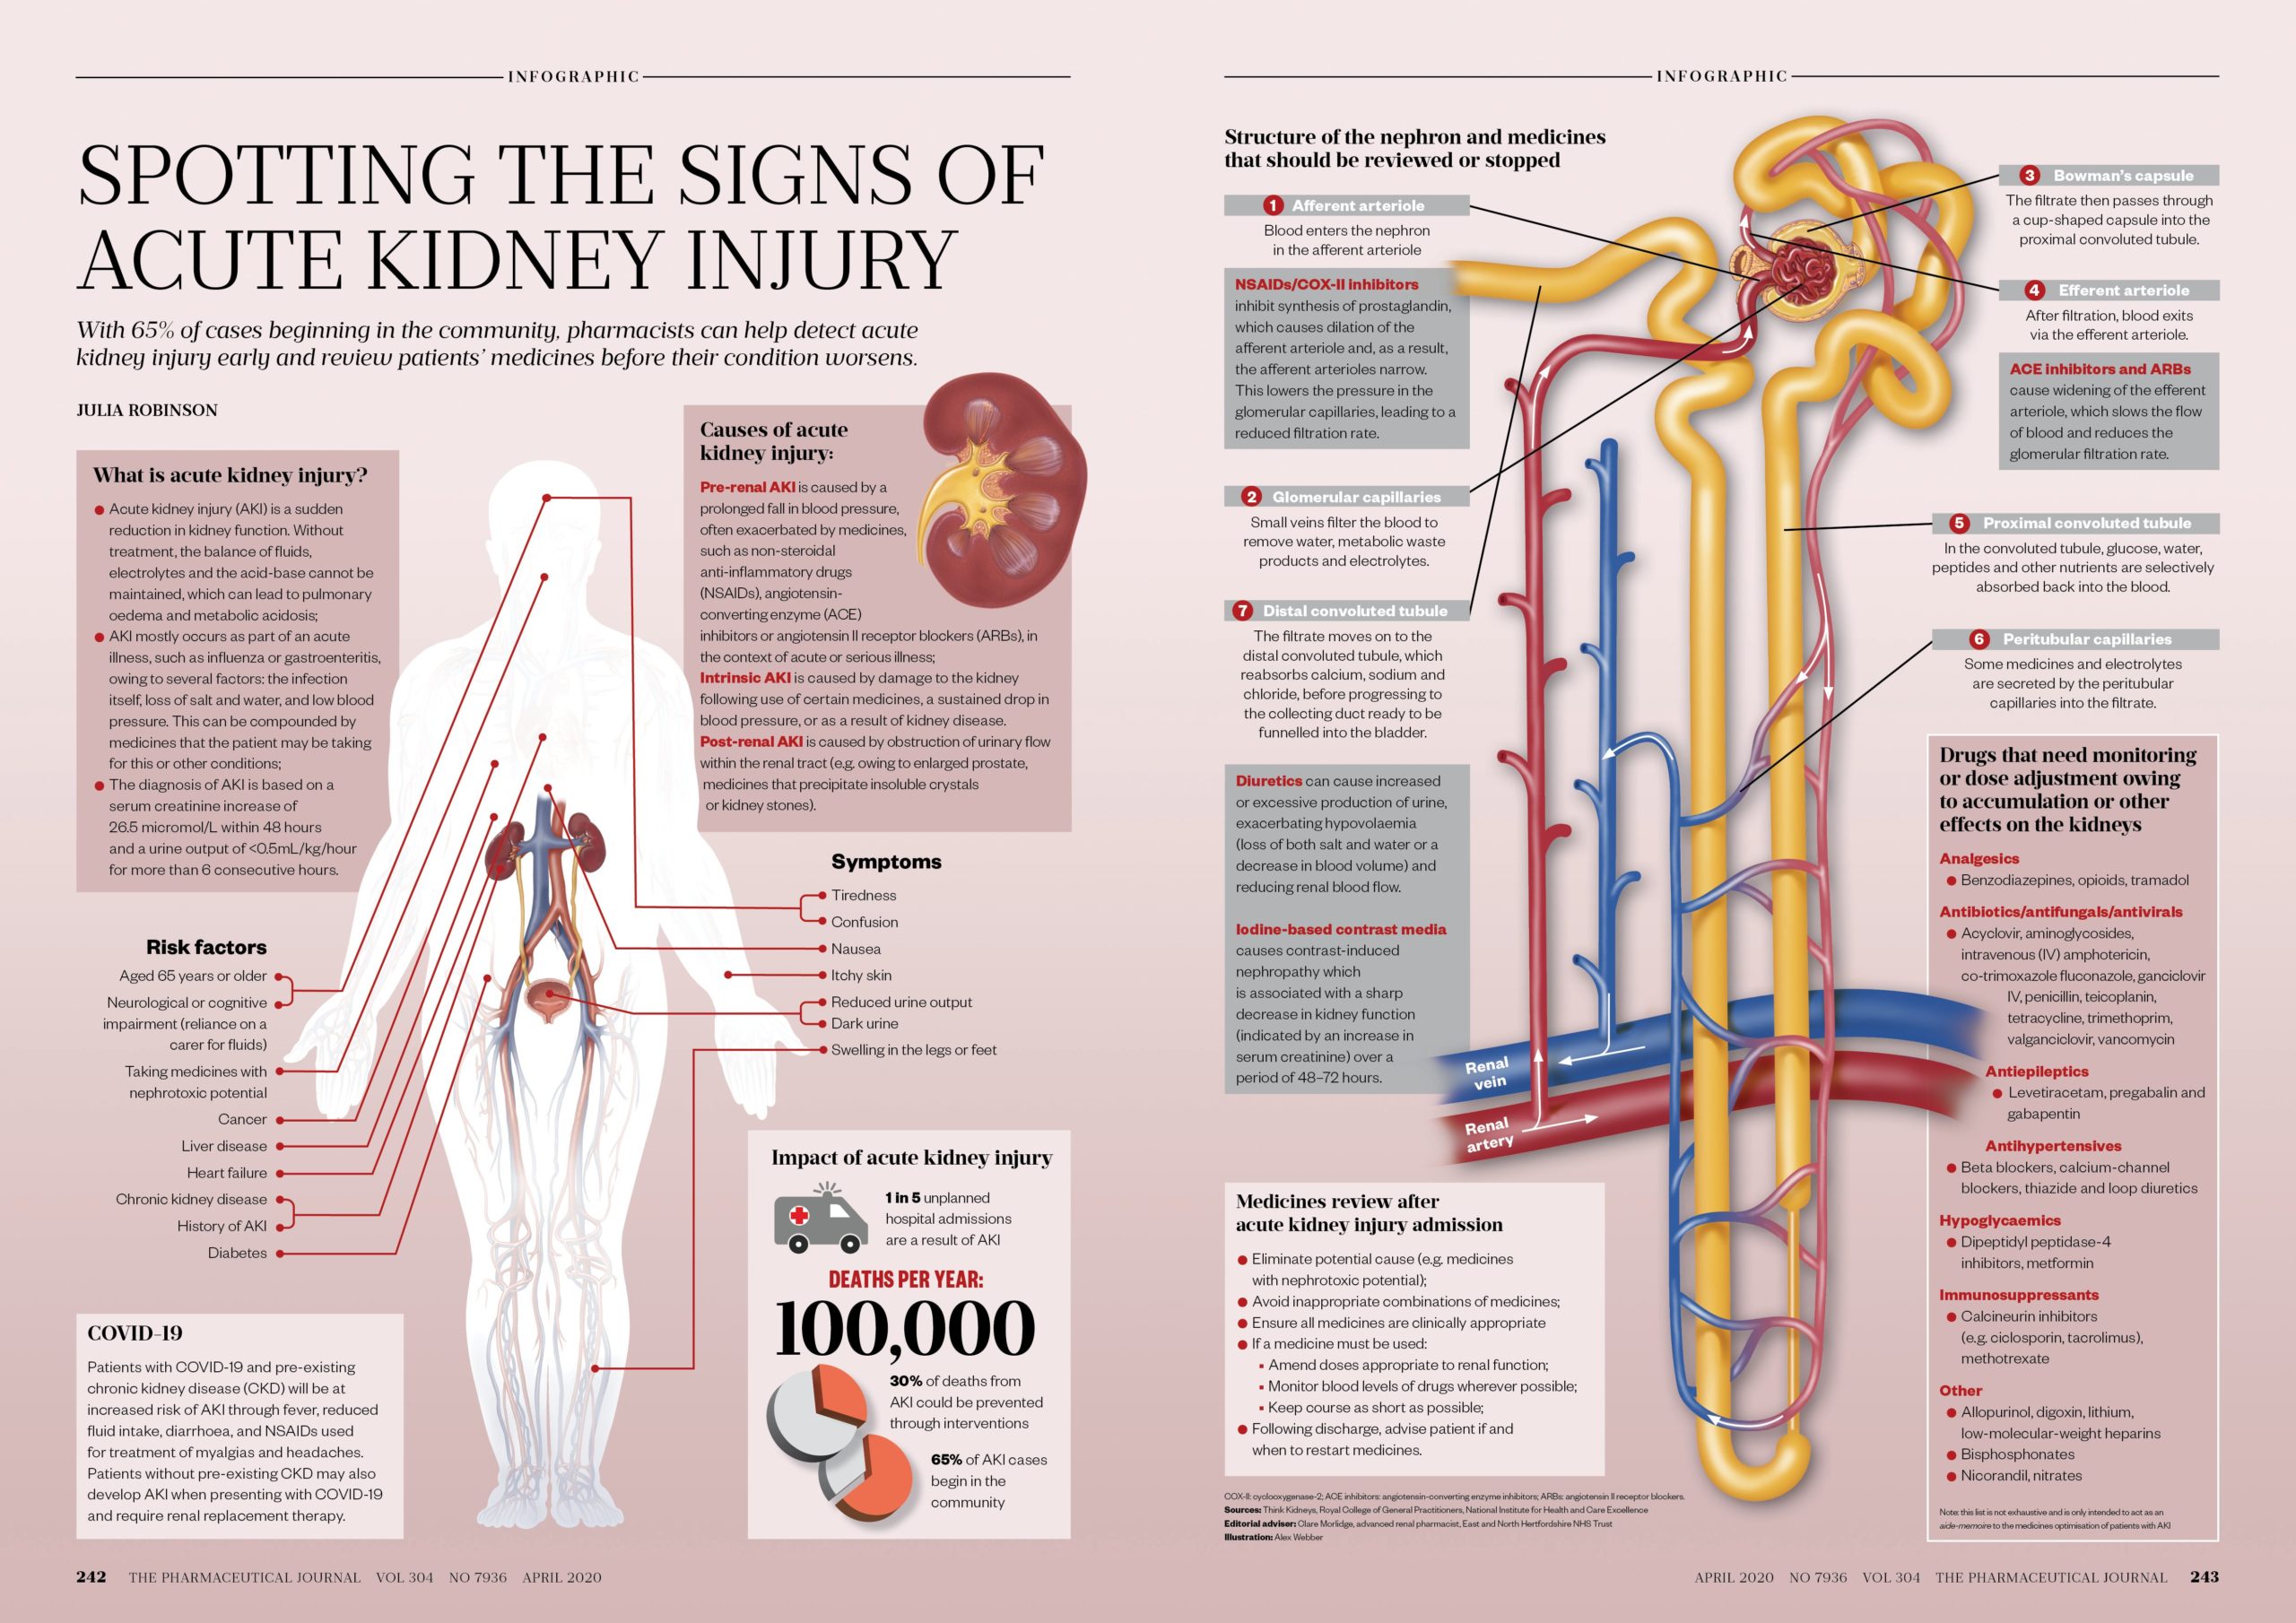 spotting-the-signs-of-acute-kidney-injury-the-pharmaceutical-journal